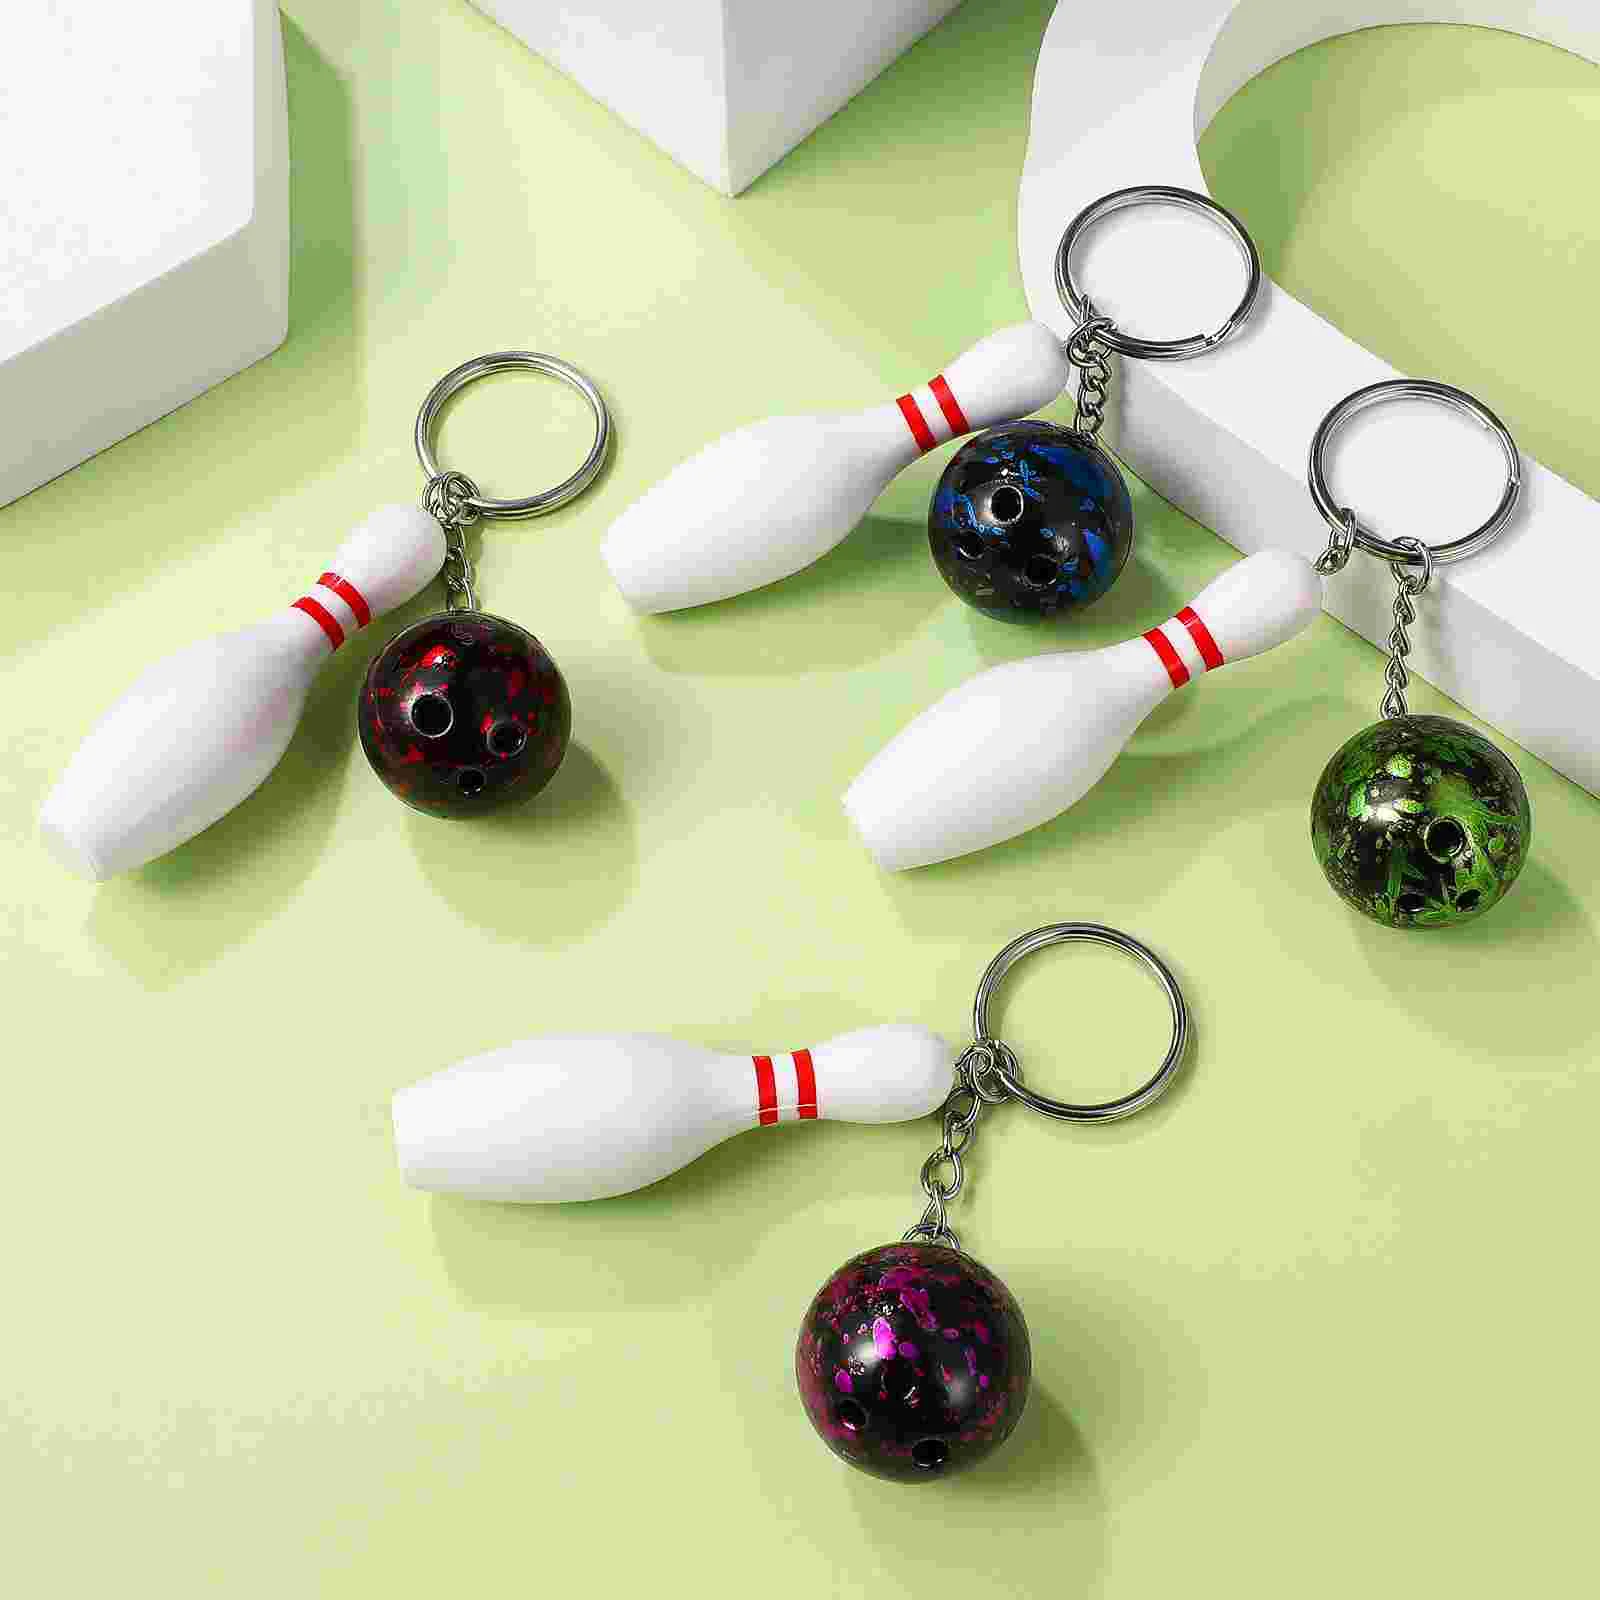 

8 Pcs Bowling Keychains Sport Style Pendant Keyrings Bowling Party Favors for Backpack Souvenir Gifts